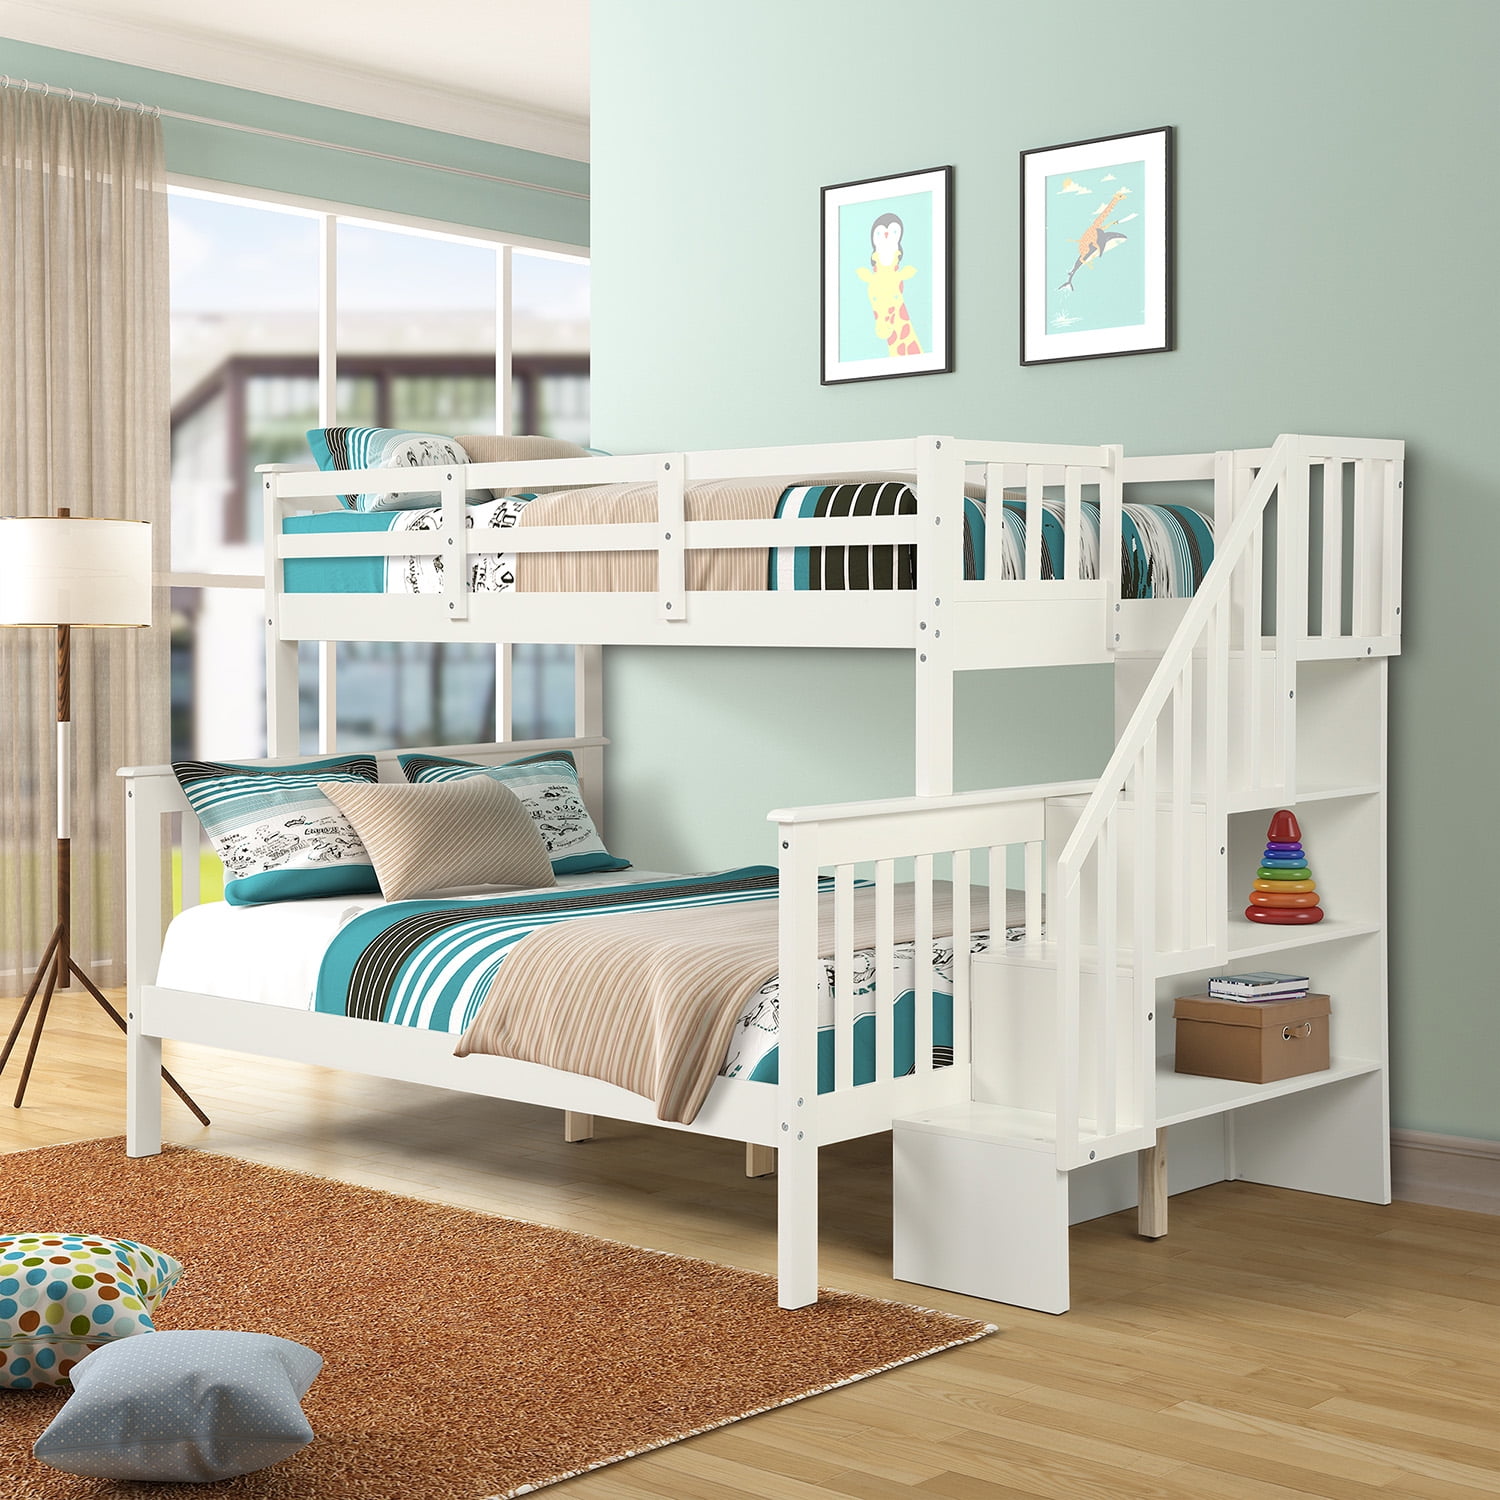 Guardrails Ladder Twin Bunk Beds, Full Size Bunk Bed Bedding